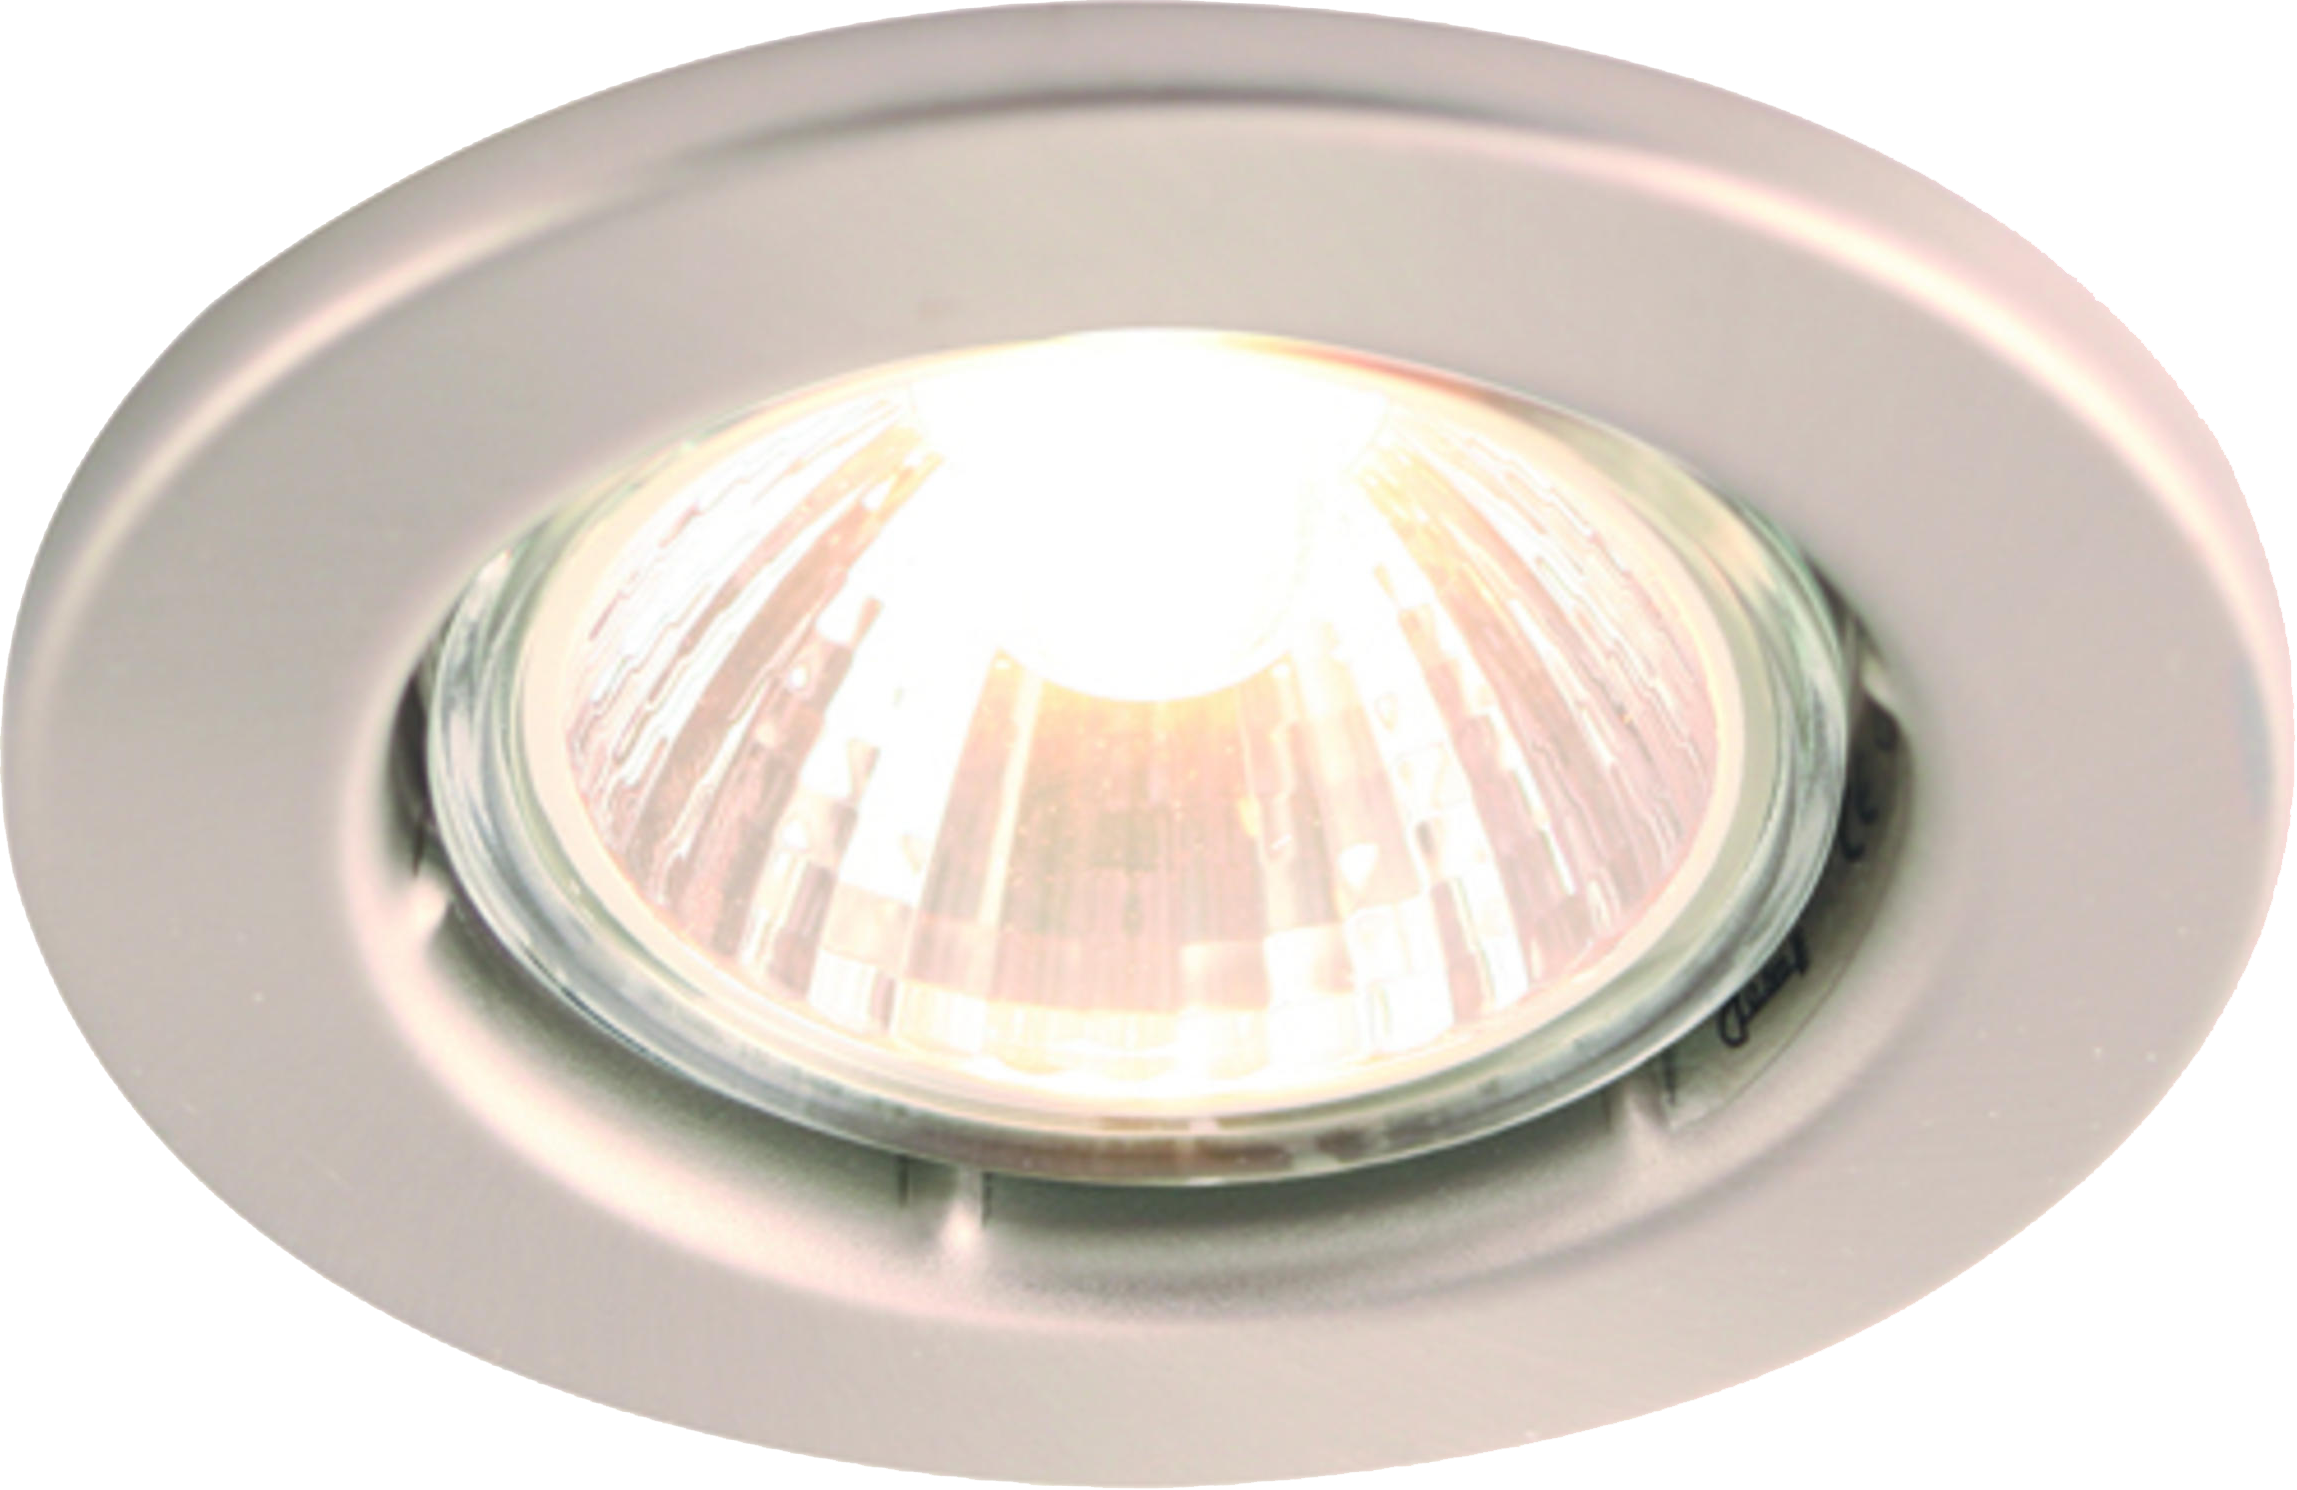 IP20 50W GU10 Brushed Chrome Recessed Fixed Downlight - DGZ10CBR 